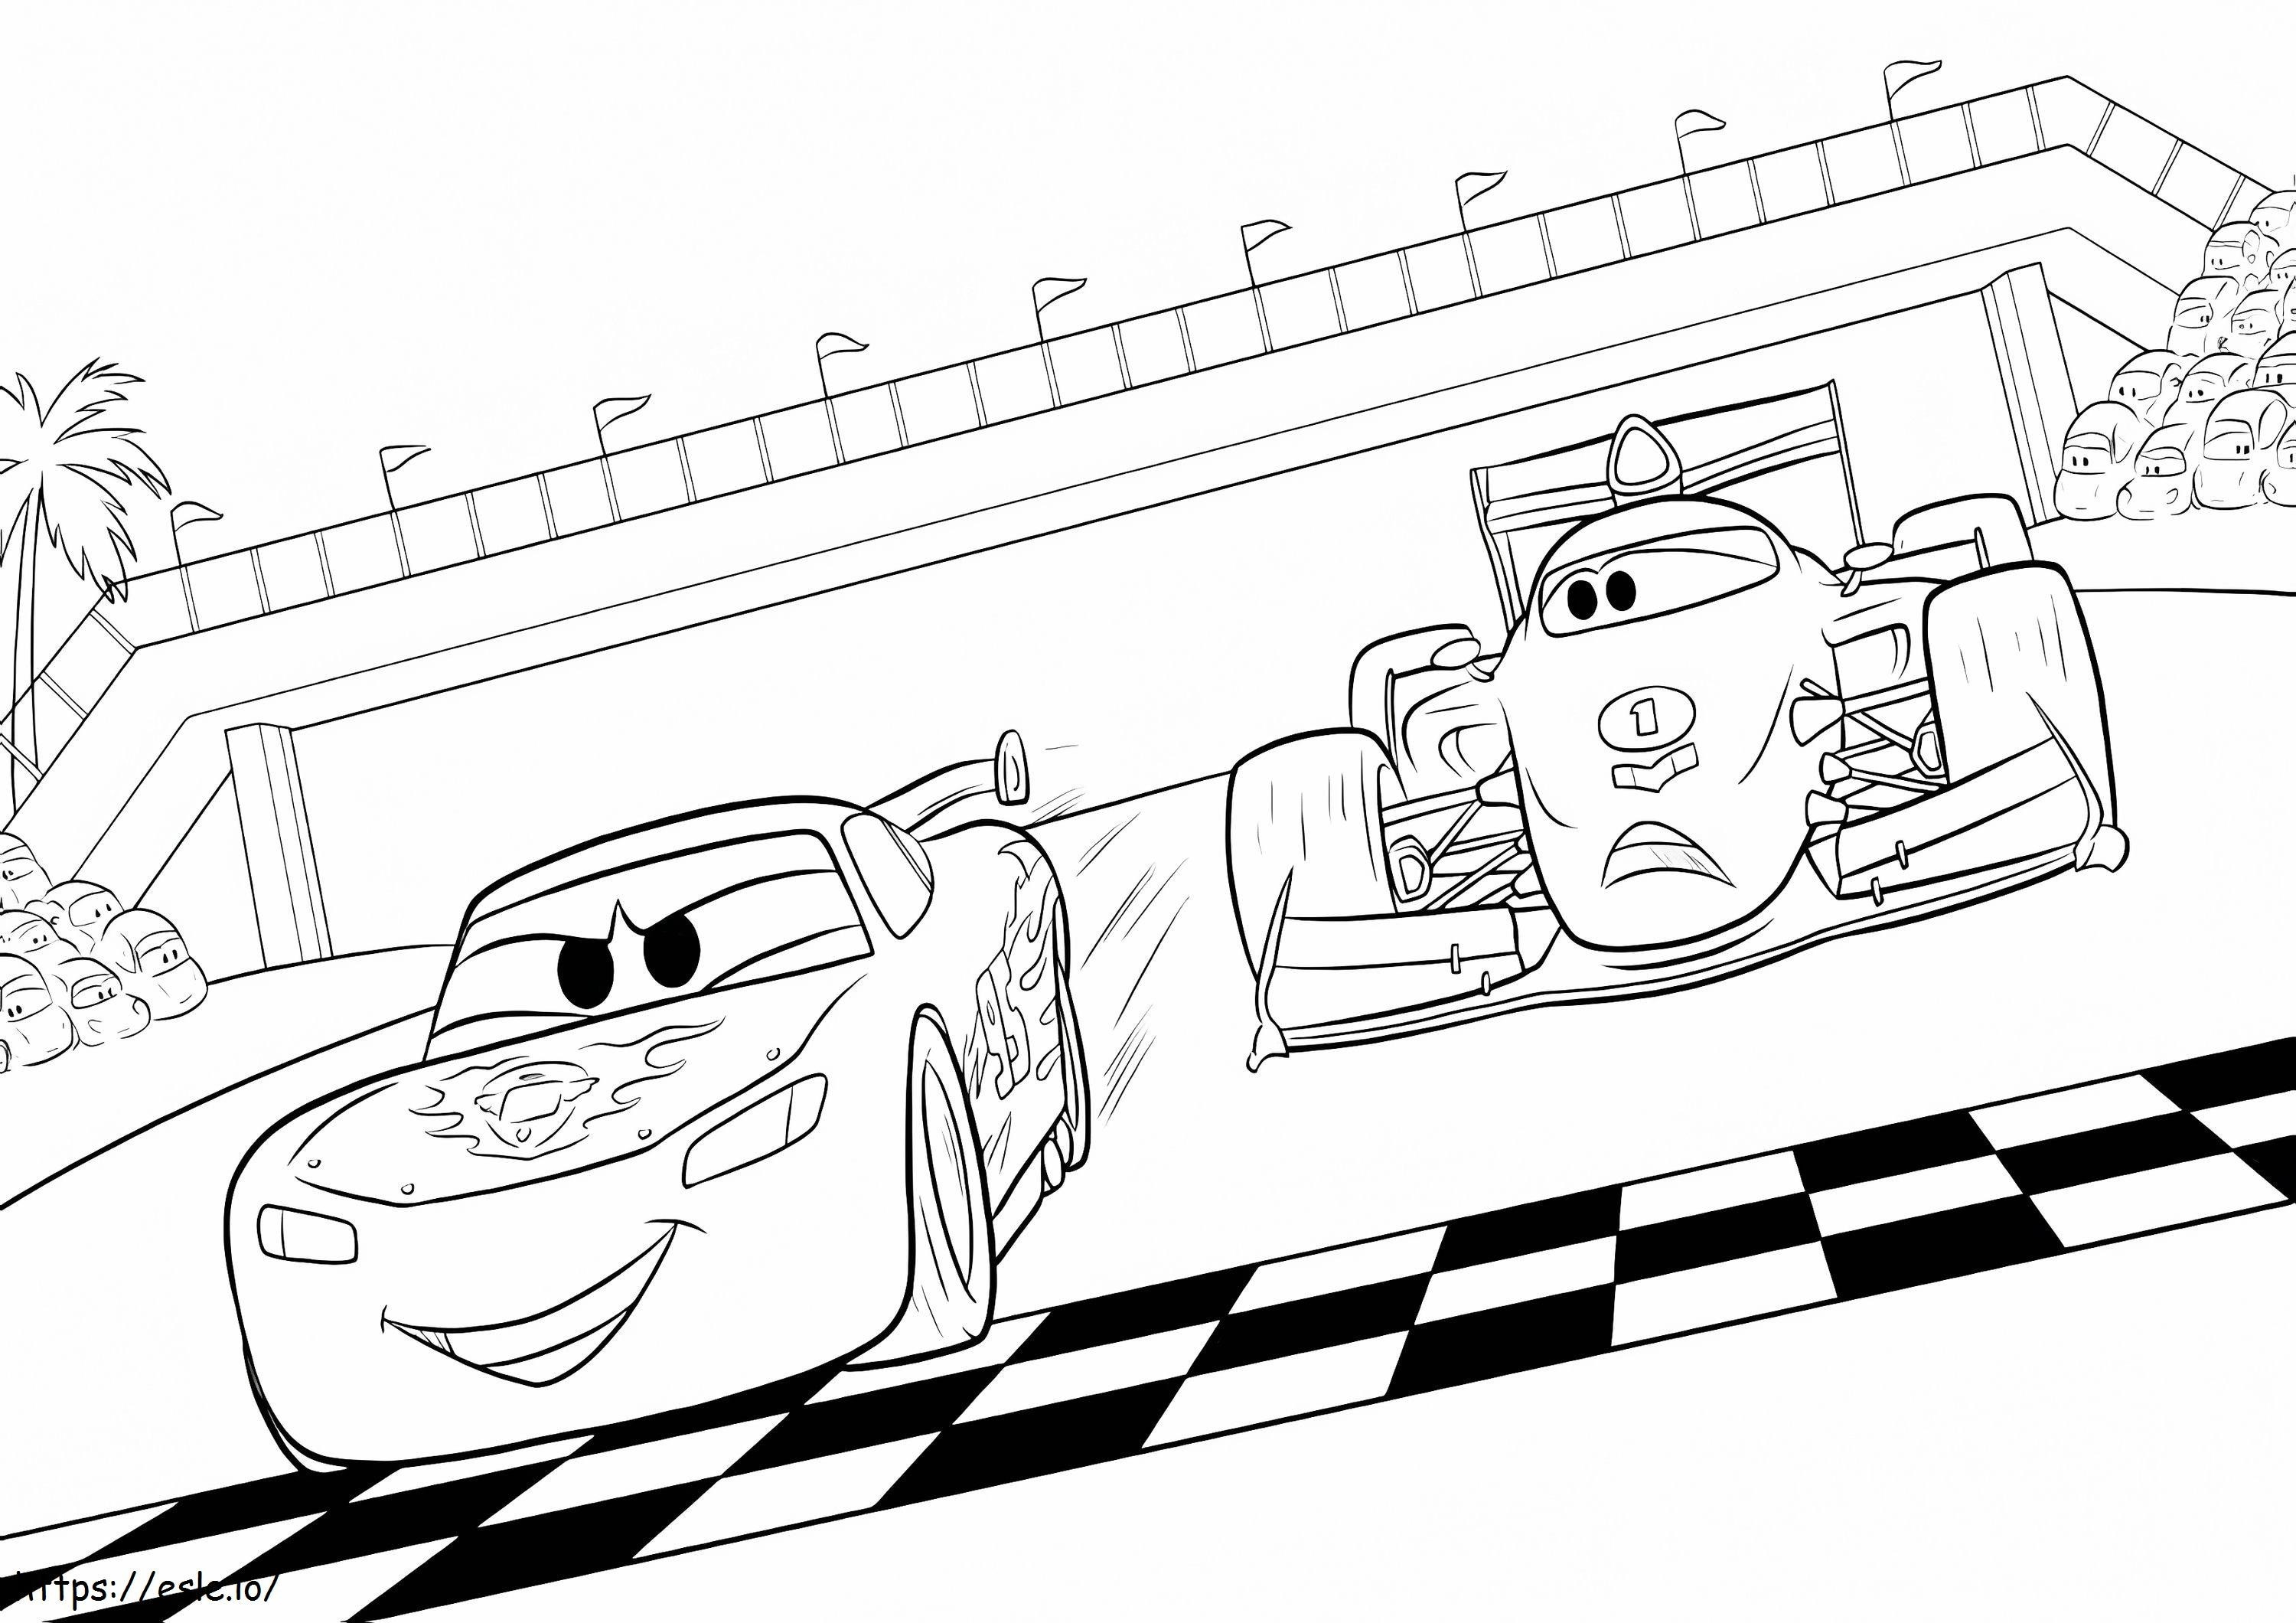  Lightning Mcqueen And Mater Free Printable Lightning For Kids Best Lightning To Print And Color Lightning Mcqueen And Tow Mater Gambar Mewarnai